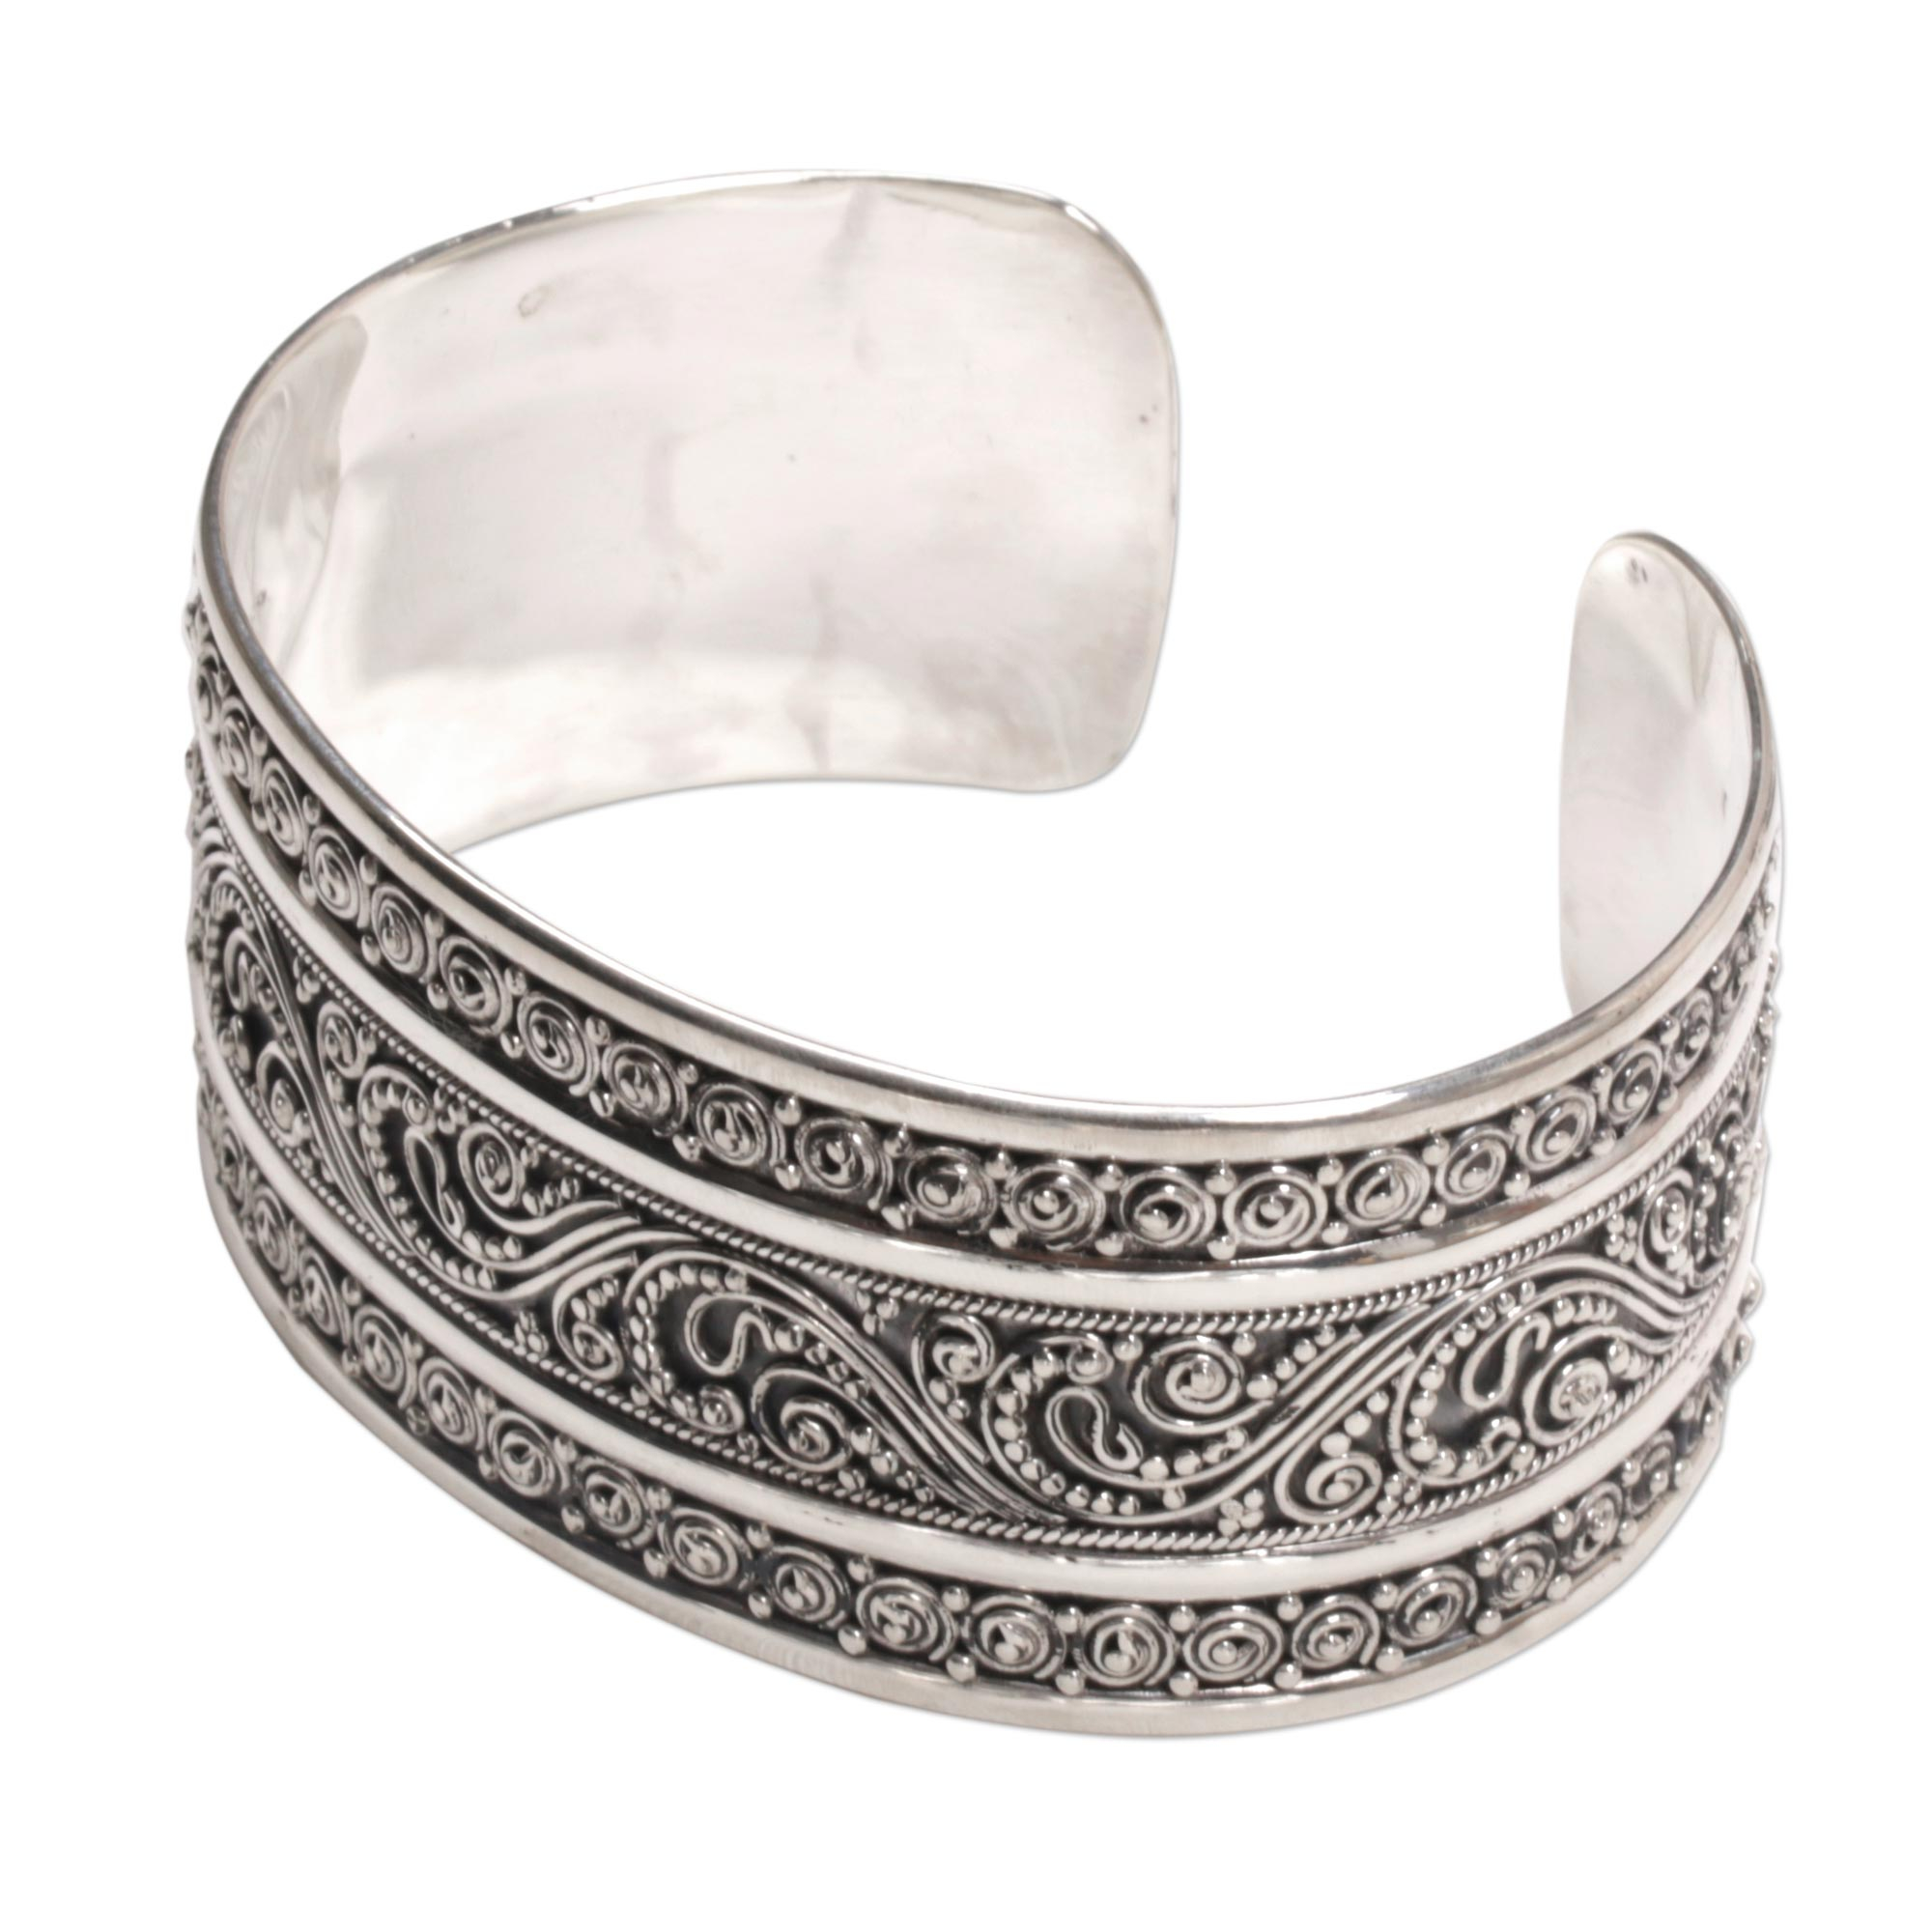 Dot Motif Sterling Silver Cuff Bracelet from Bali - Dotted Temple | NOVICA